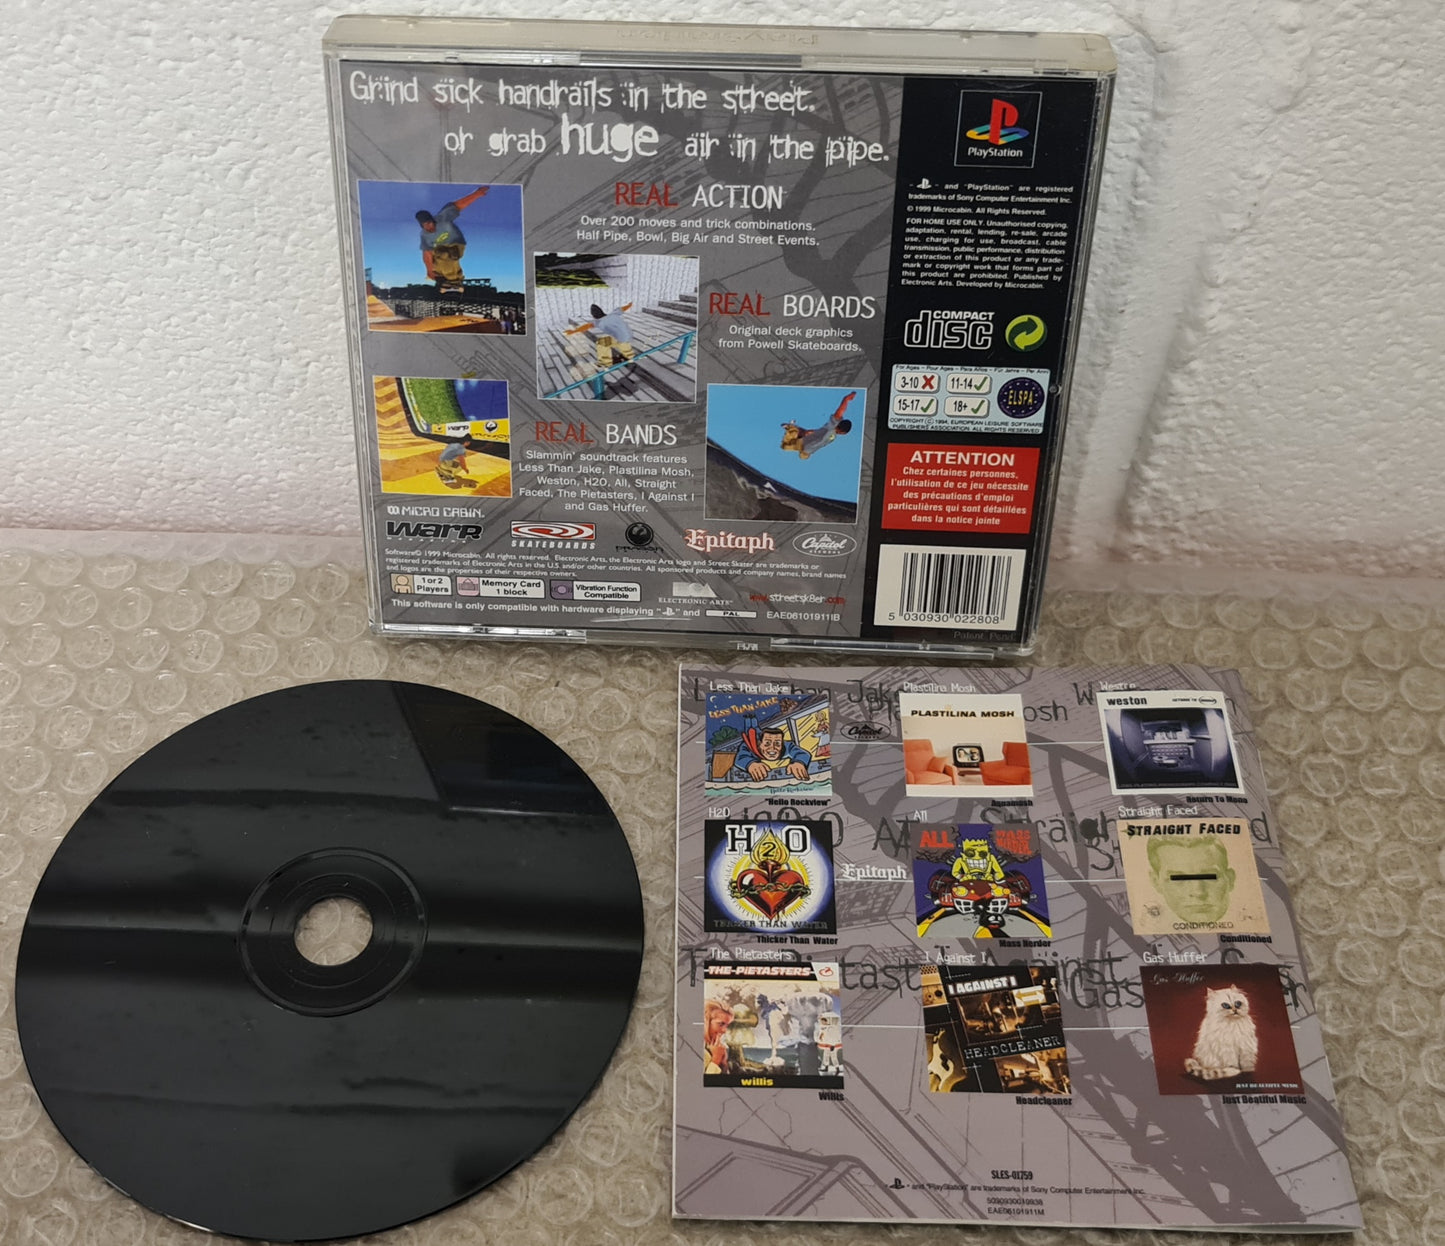 Street Skater Sony Playstation 1 (PS1) Game